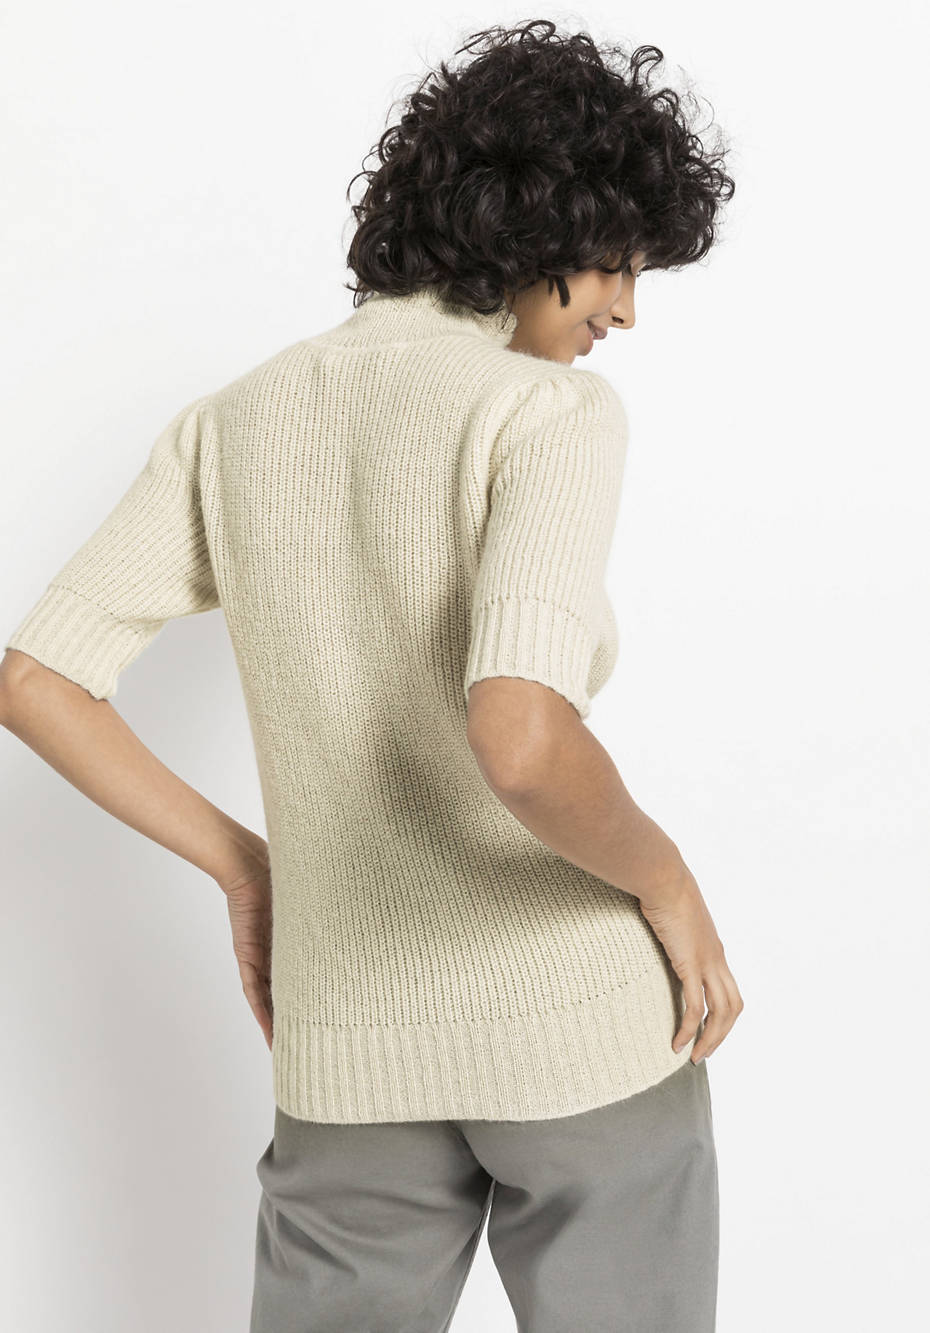 Half-sleeved sweater made from pure alpaca